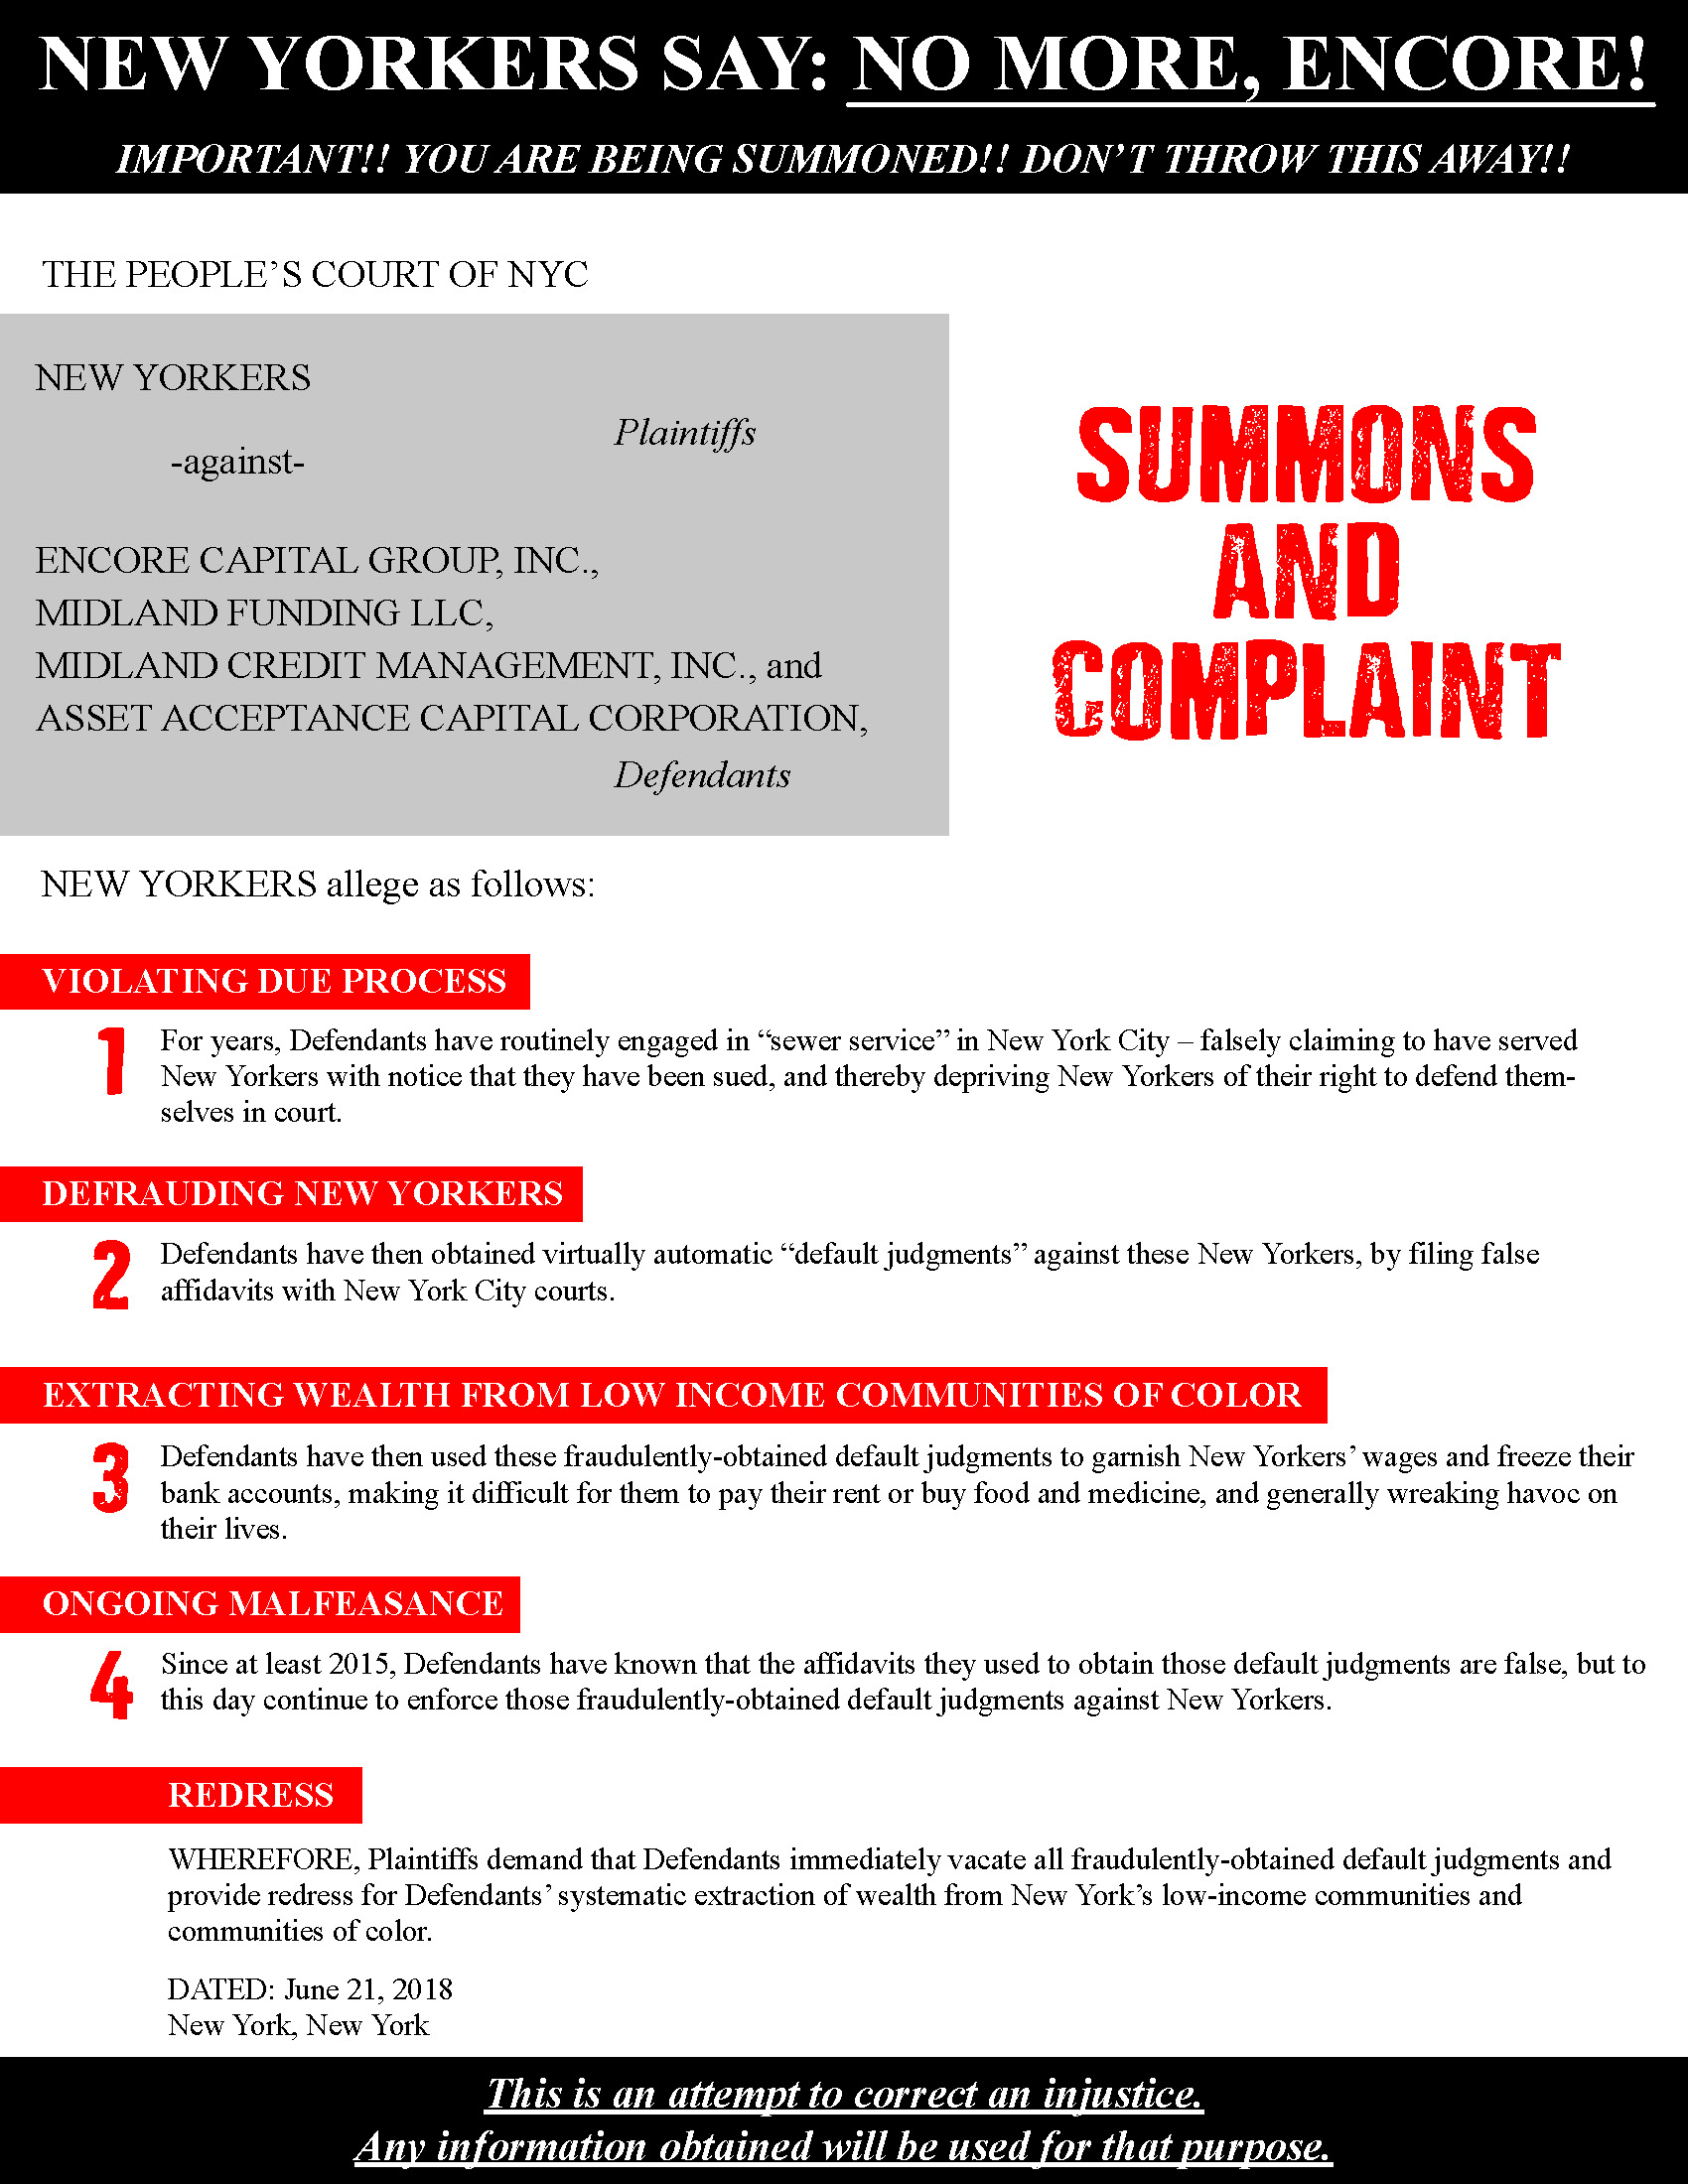 Summons and Complaint